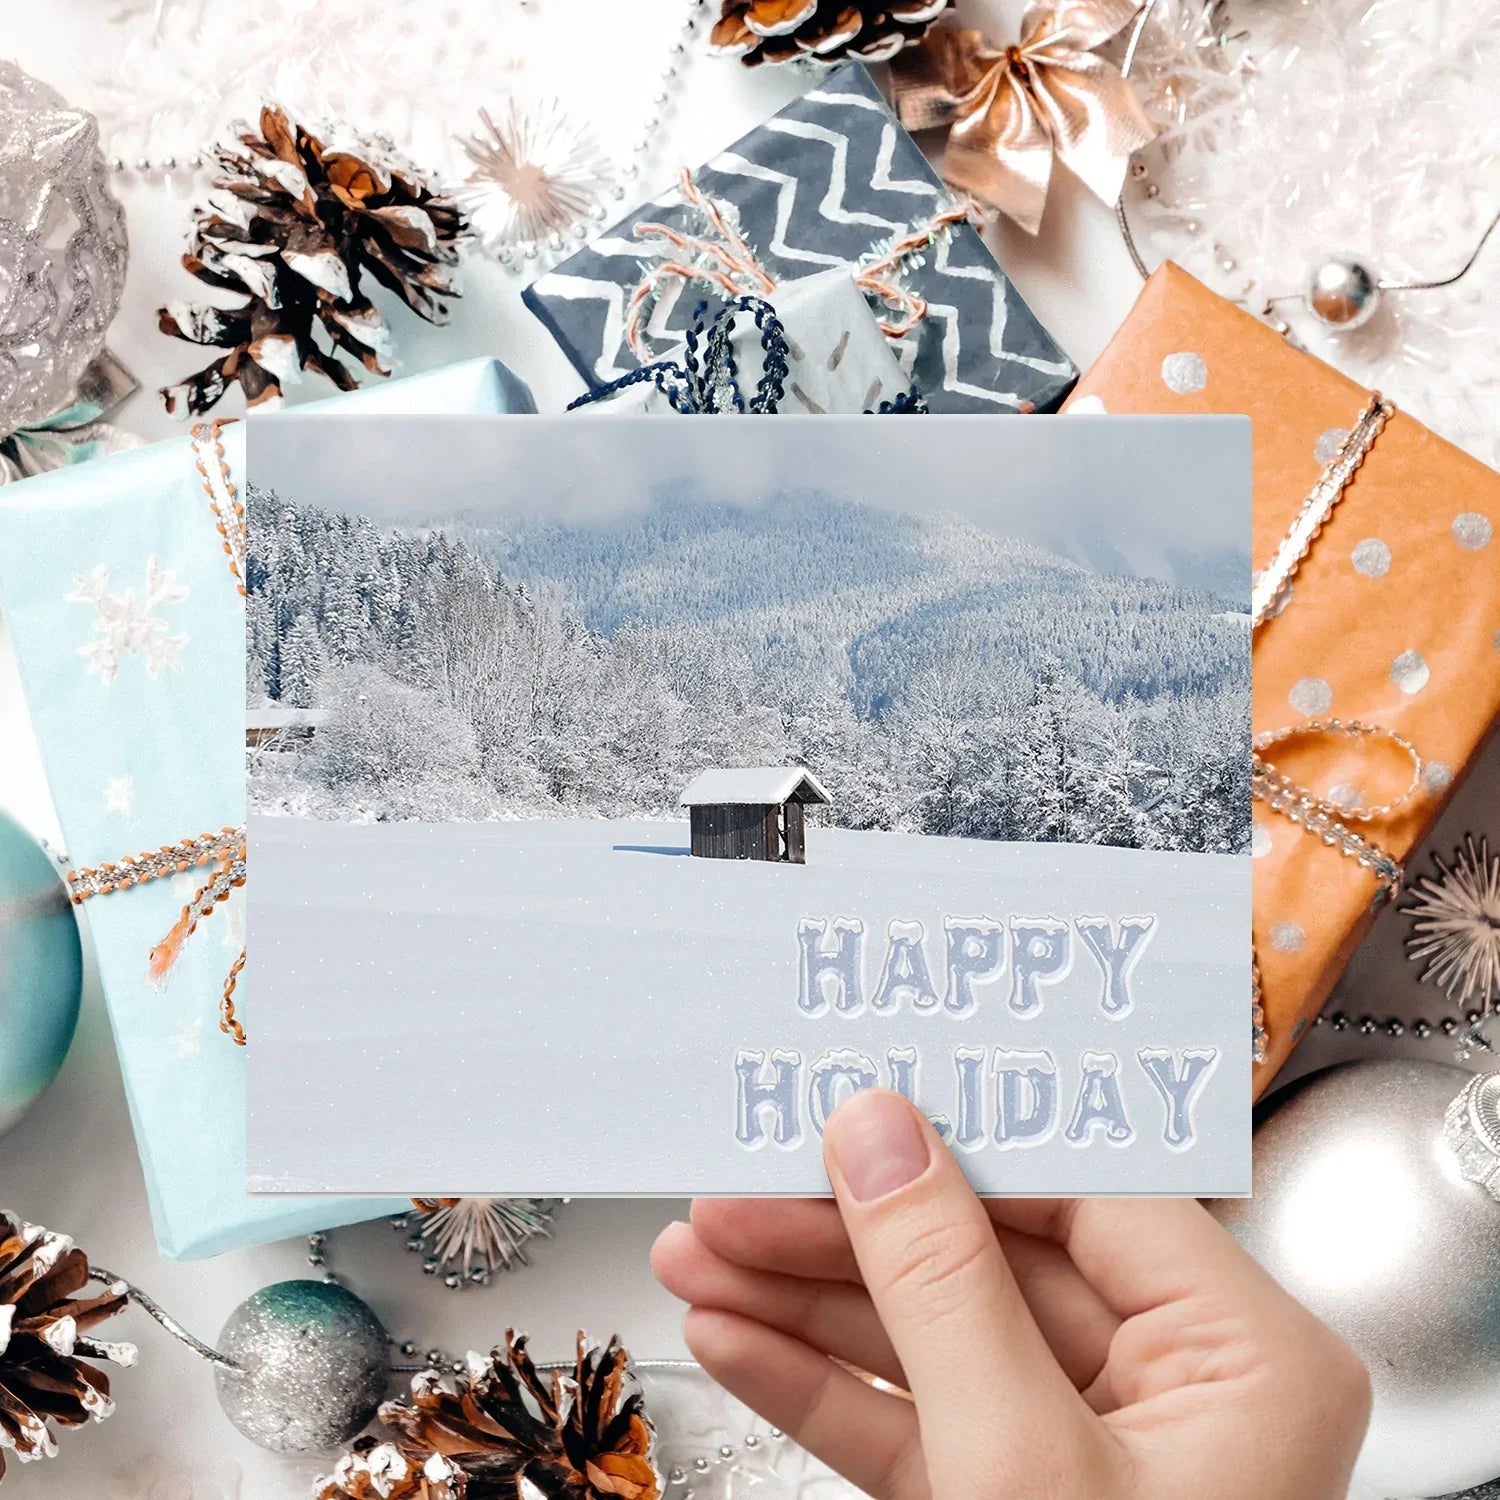 Happy Holiday Snow Cards & Envelopes - 25 Cards & 25 Envelopes per Pack (SNOW WINTER CABIN) FoldCard